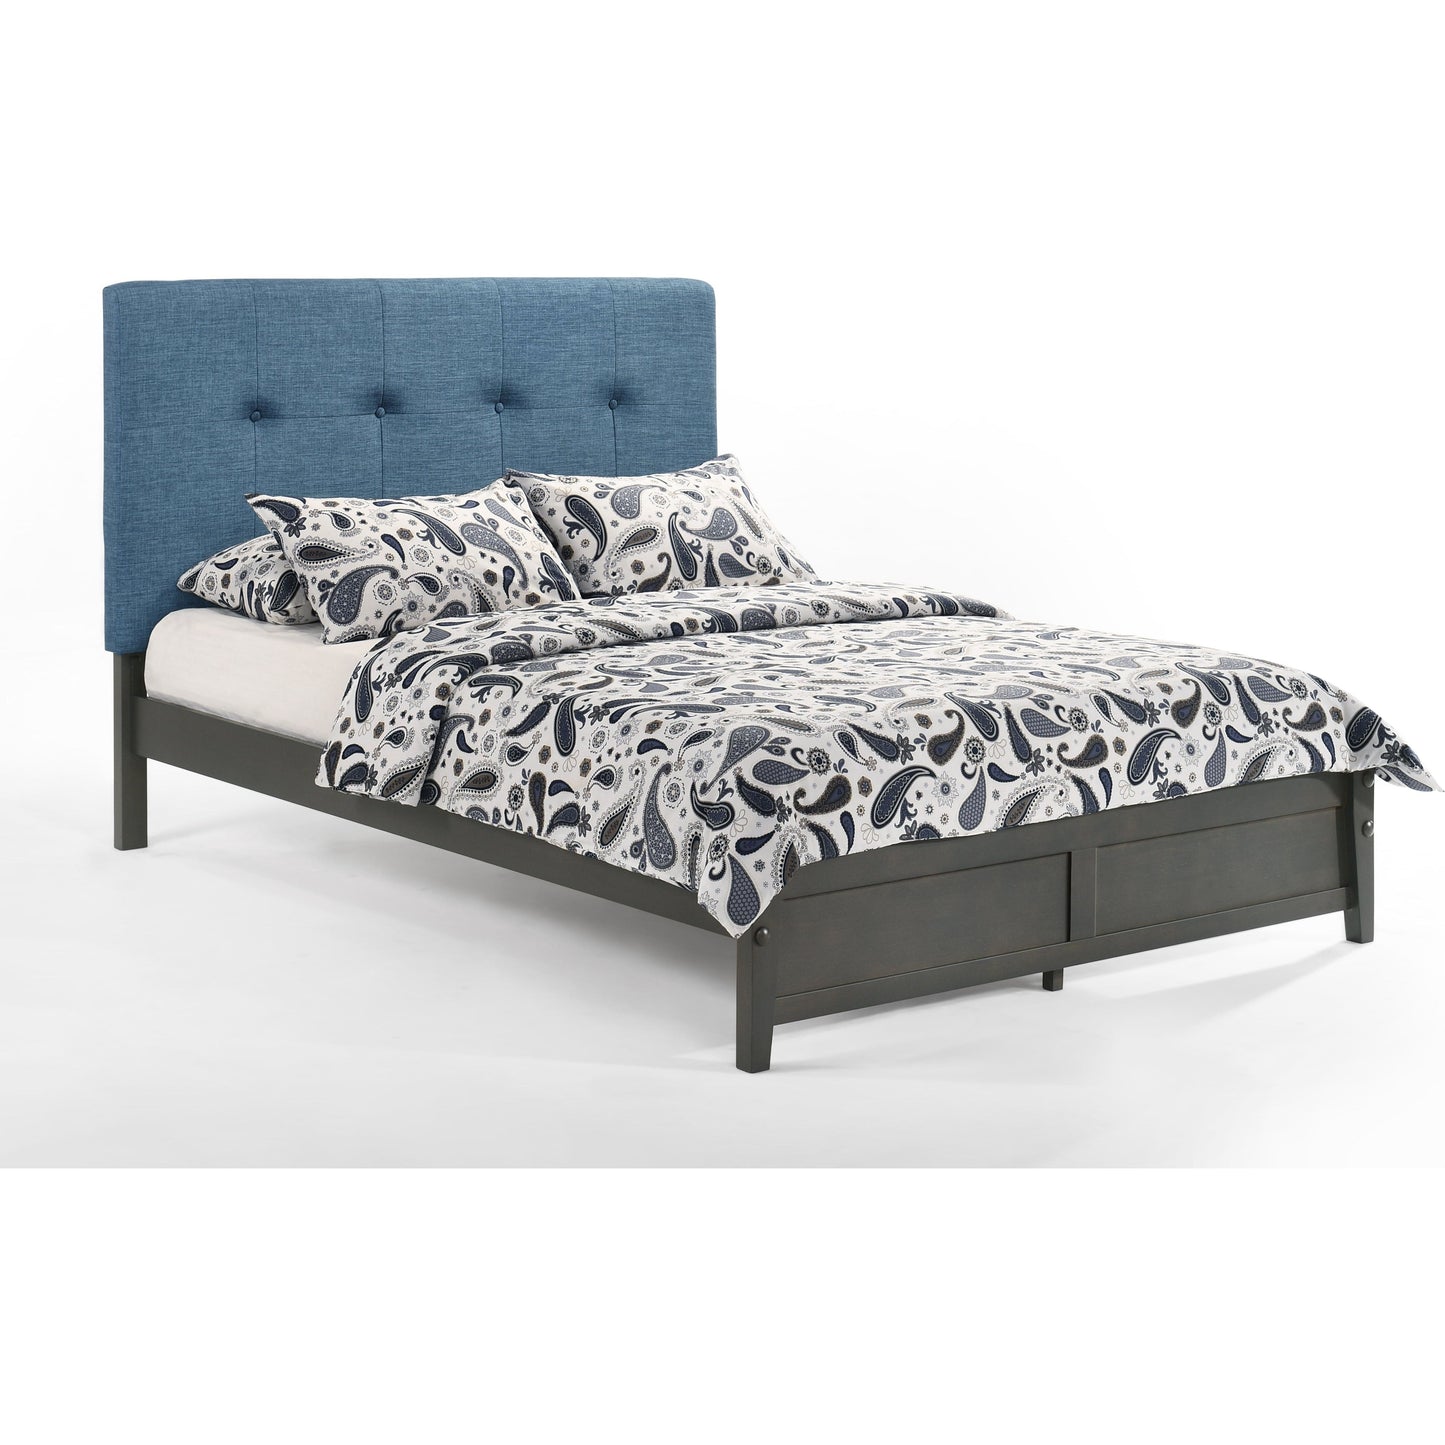 The Bedroom Emporium Paprika Twin Bed in Charcoal with Stonewash Finish Frame (K Series)